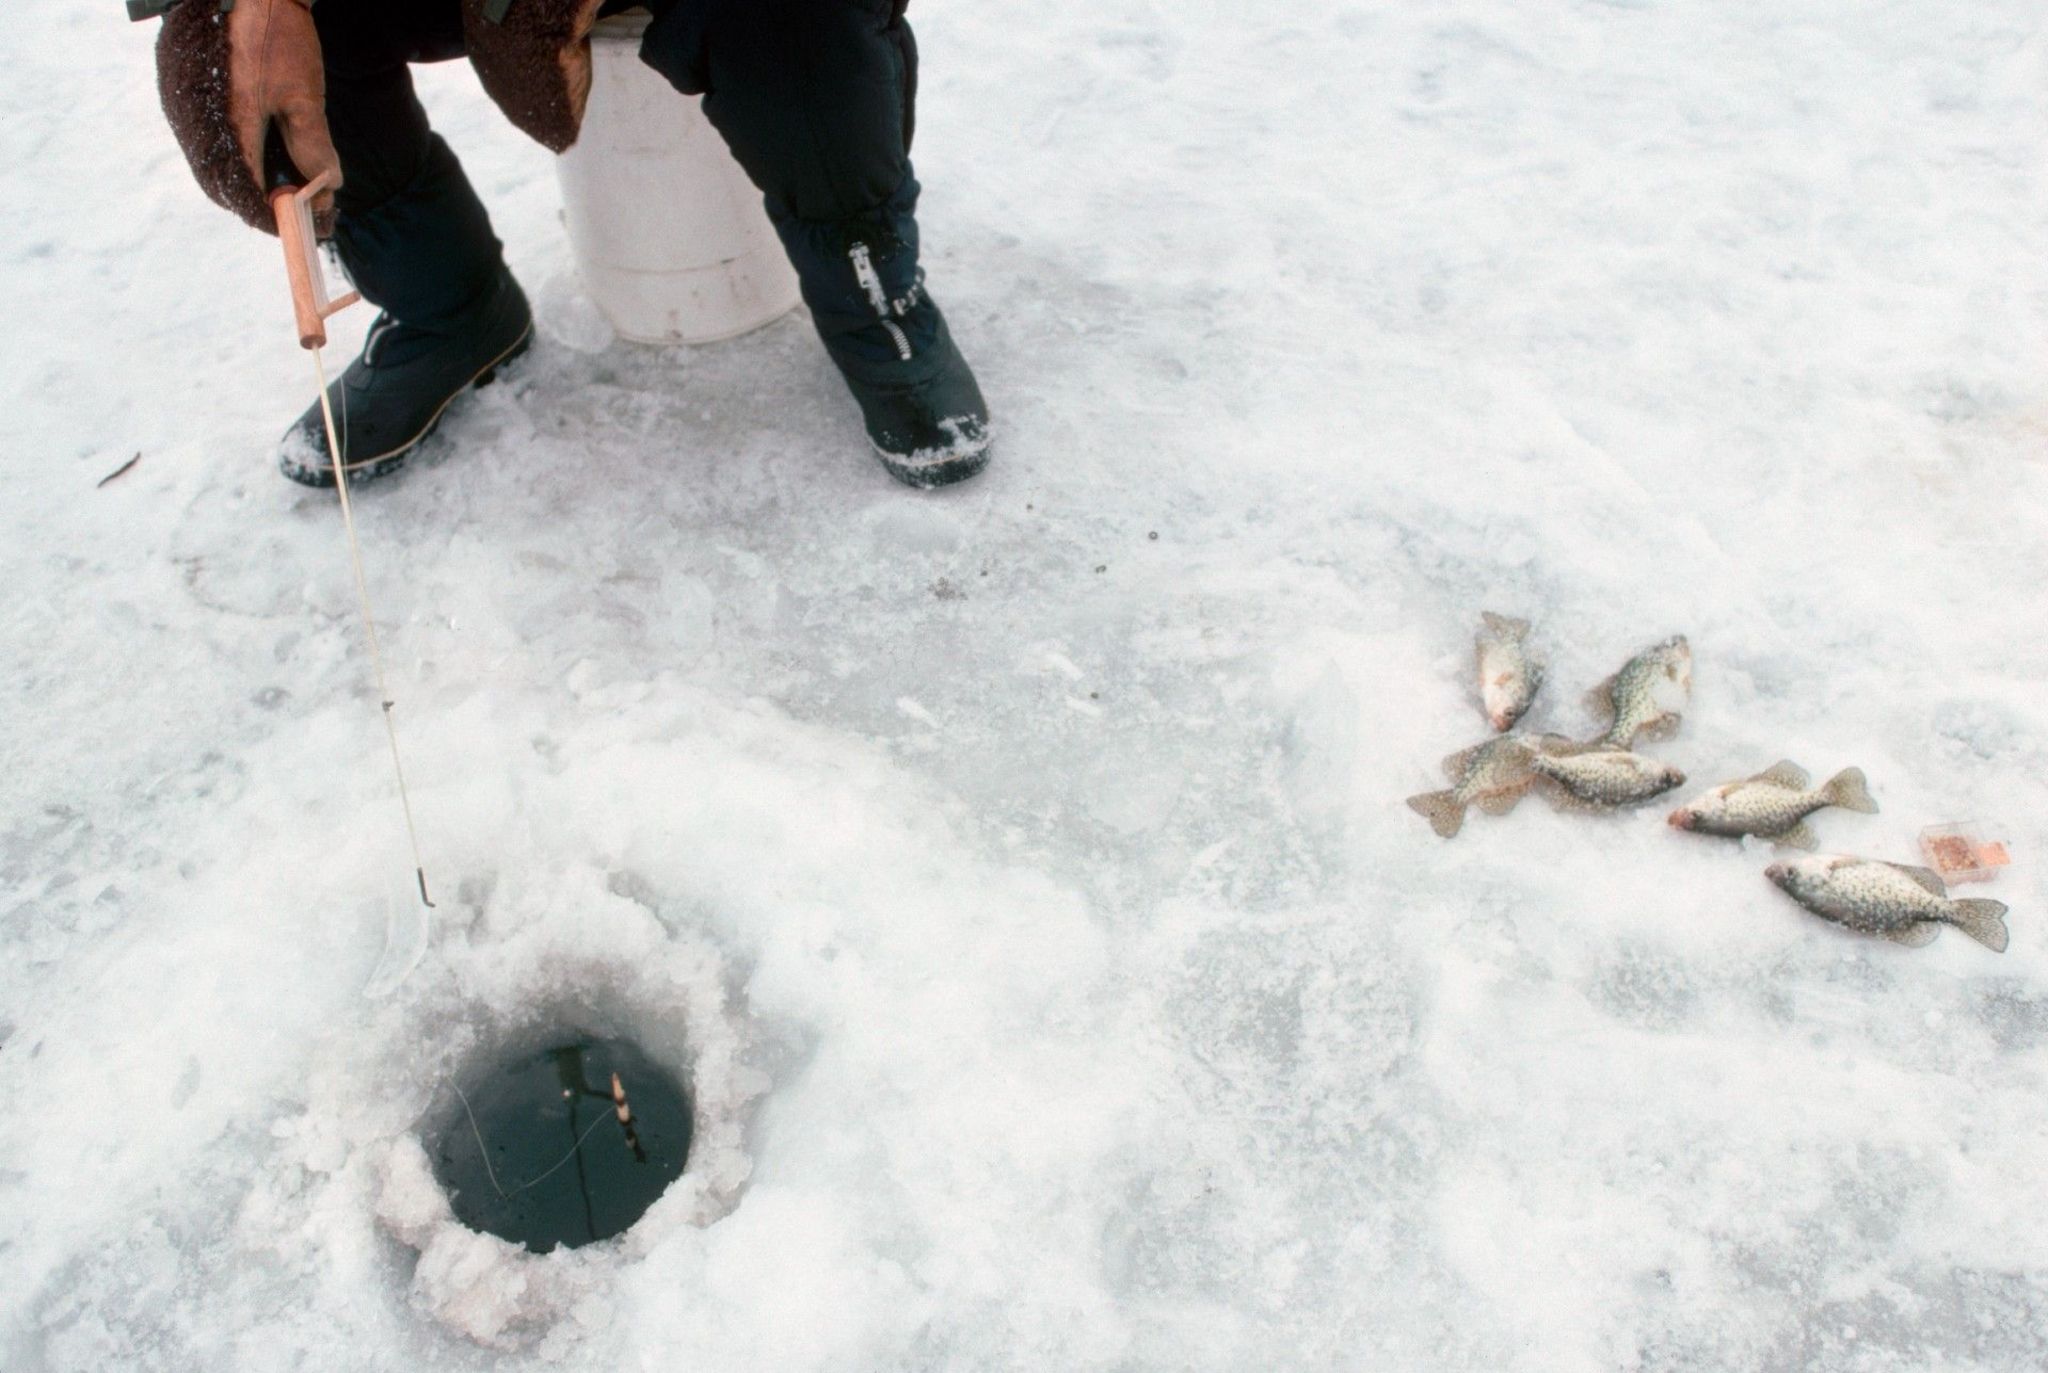 Fisherman dropping a line through a hole in the ice